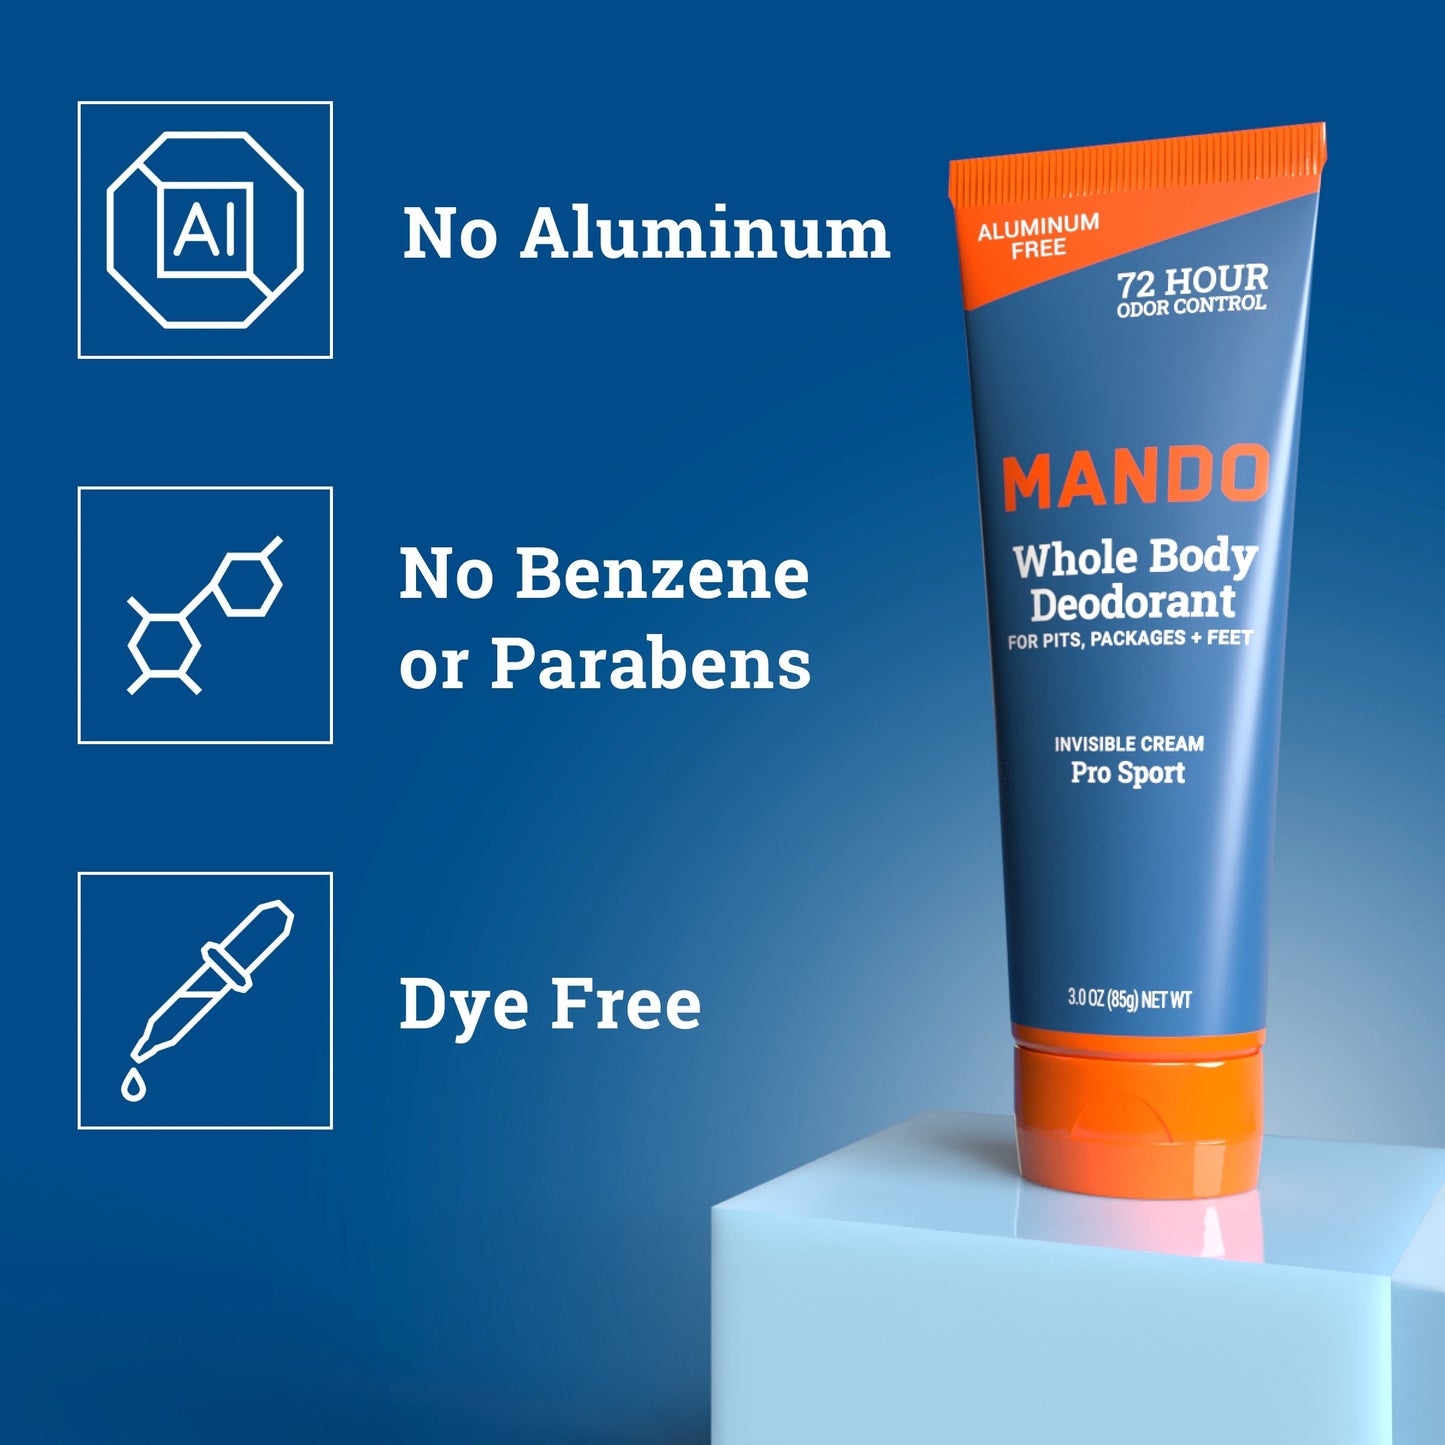 Mando Invisible cream deodorant in pro sport scent with text: No Aluminum, No Benzene or Parabens, Bye Free